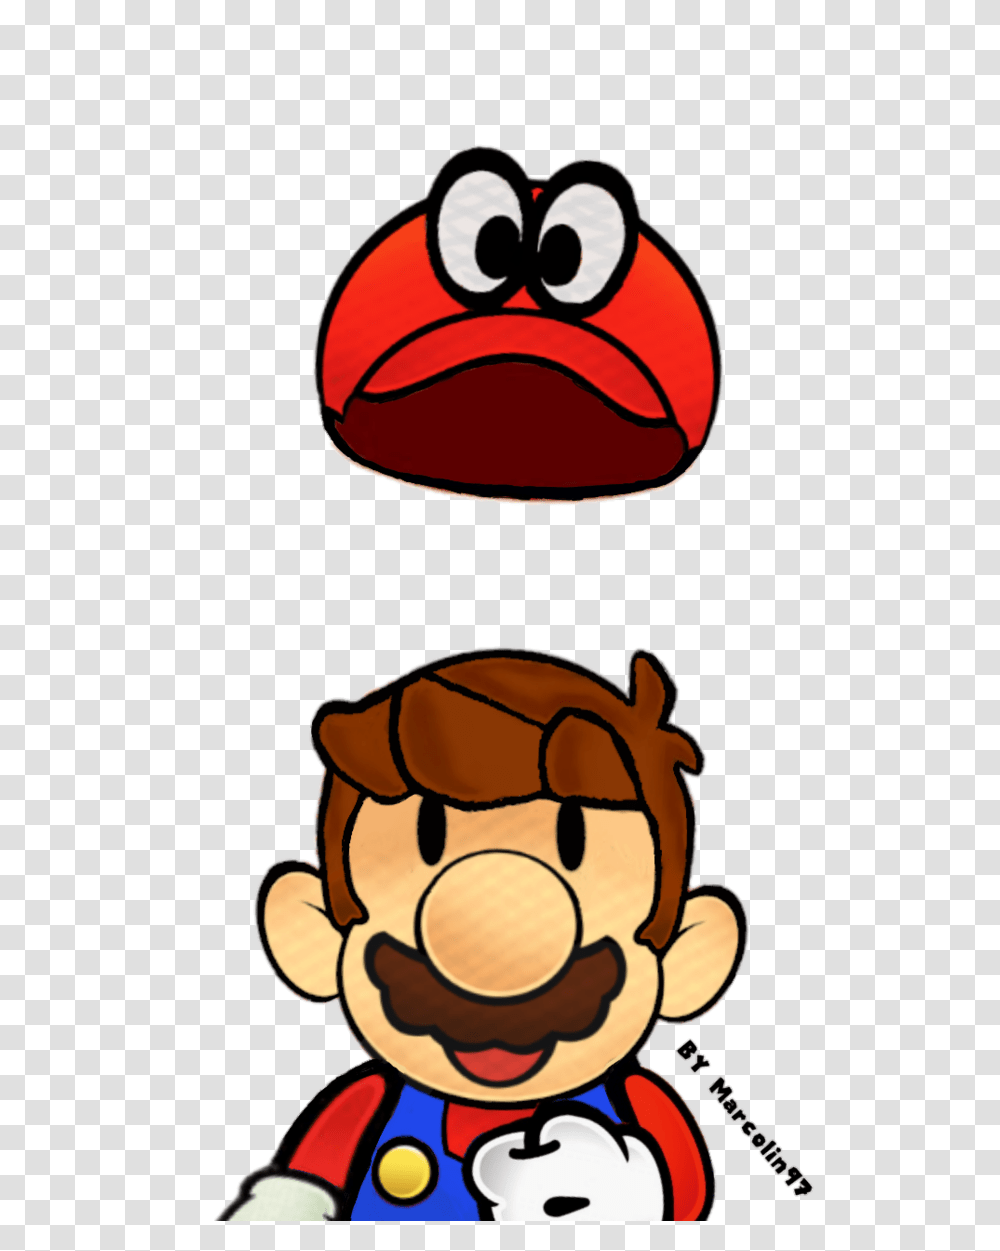 Mario Bros Paper Mario, Dynamite, Bomb, Weapon, Weaponry Transparent Png